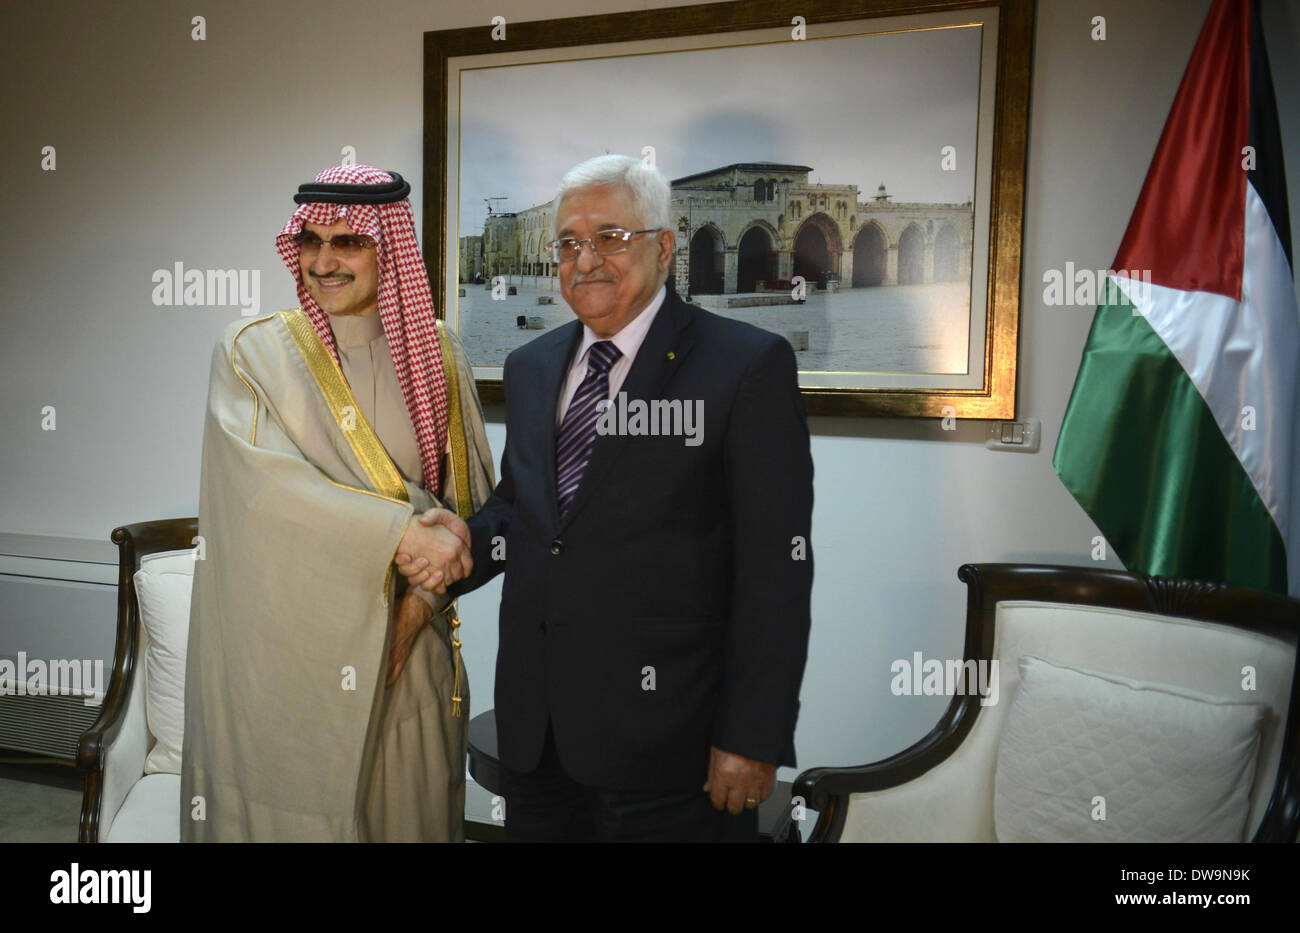 Ramallah, West Bank, Palestinian Territory. 4th Mar, 2014. Palestinian President Mahmud Abbas (R) shakes hands with Saudi Arabia's prince Al-Waleed bin Talal during their meeting in the West Bank city of Ramallah on March 4, 2014 Credit:  Issam Rimawi/APA Images/ZUMAPRESS.com/Alamy Live News Stock Photo